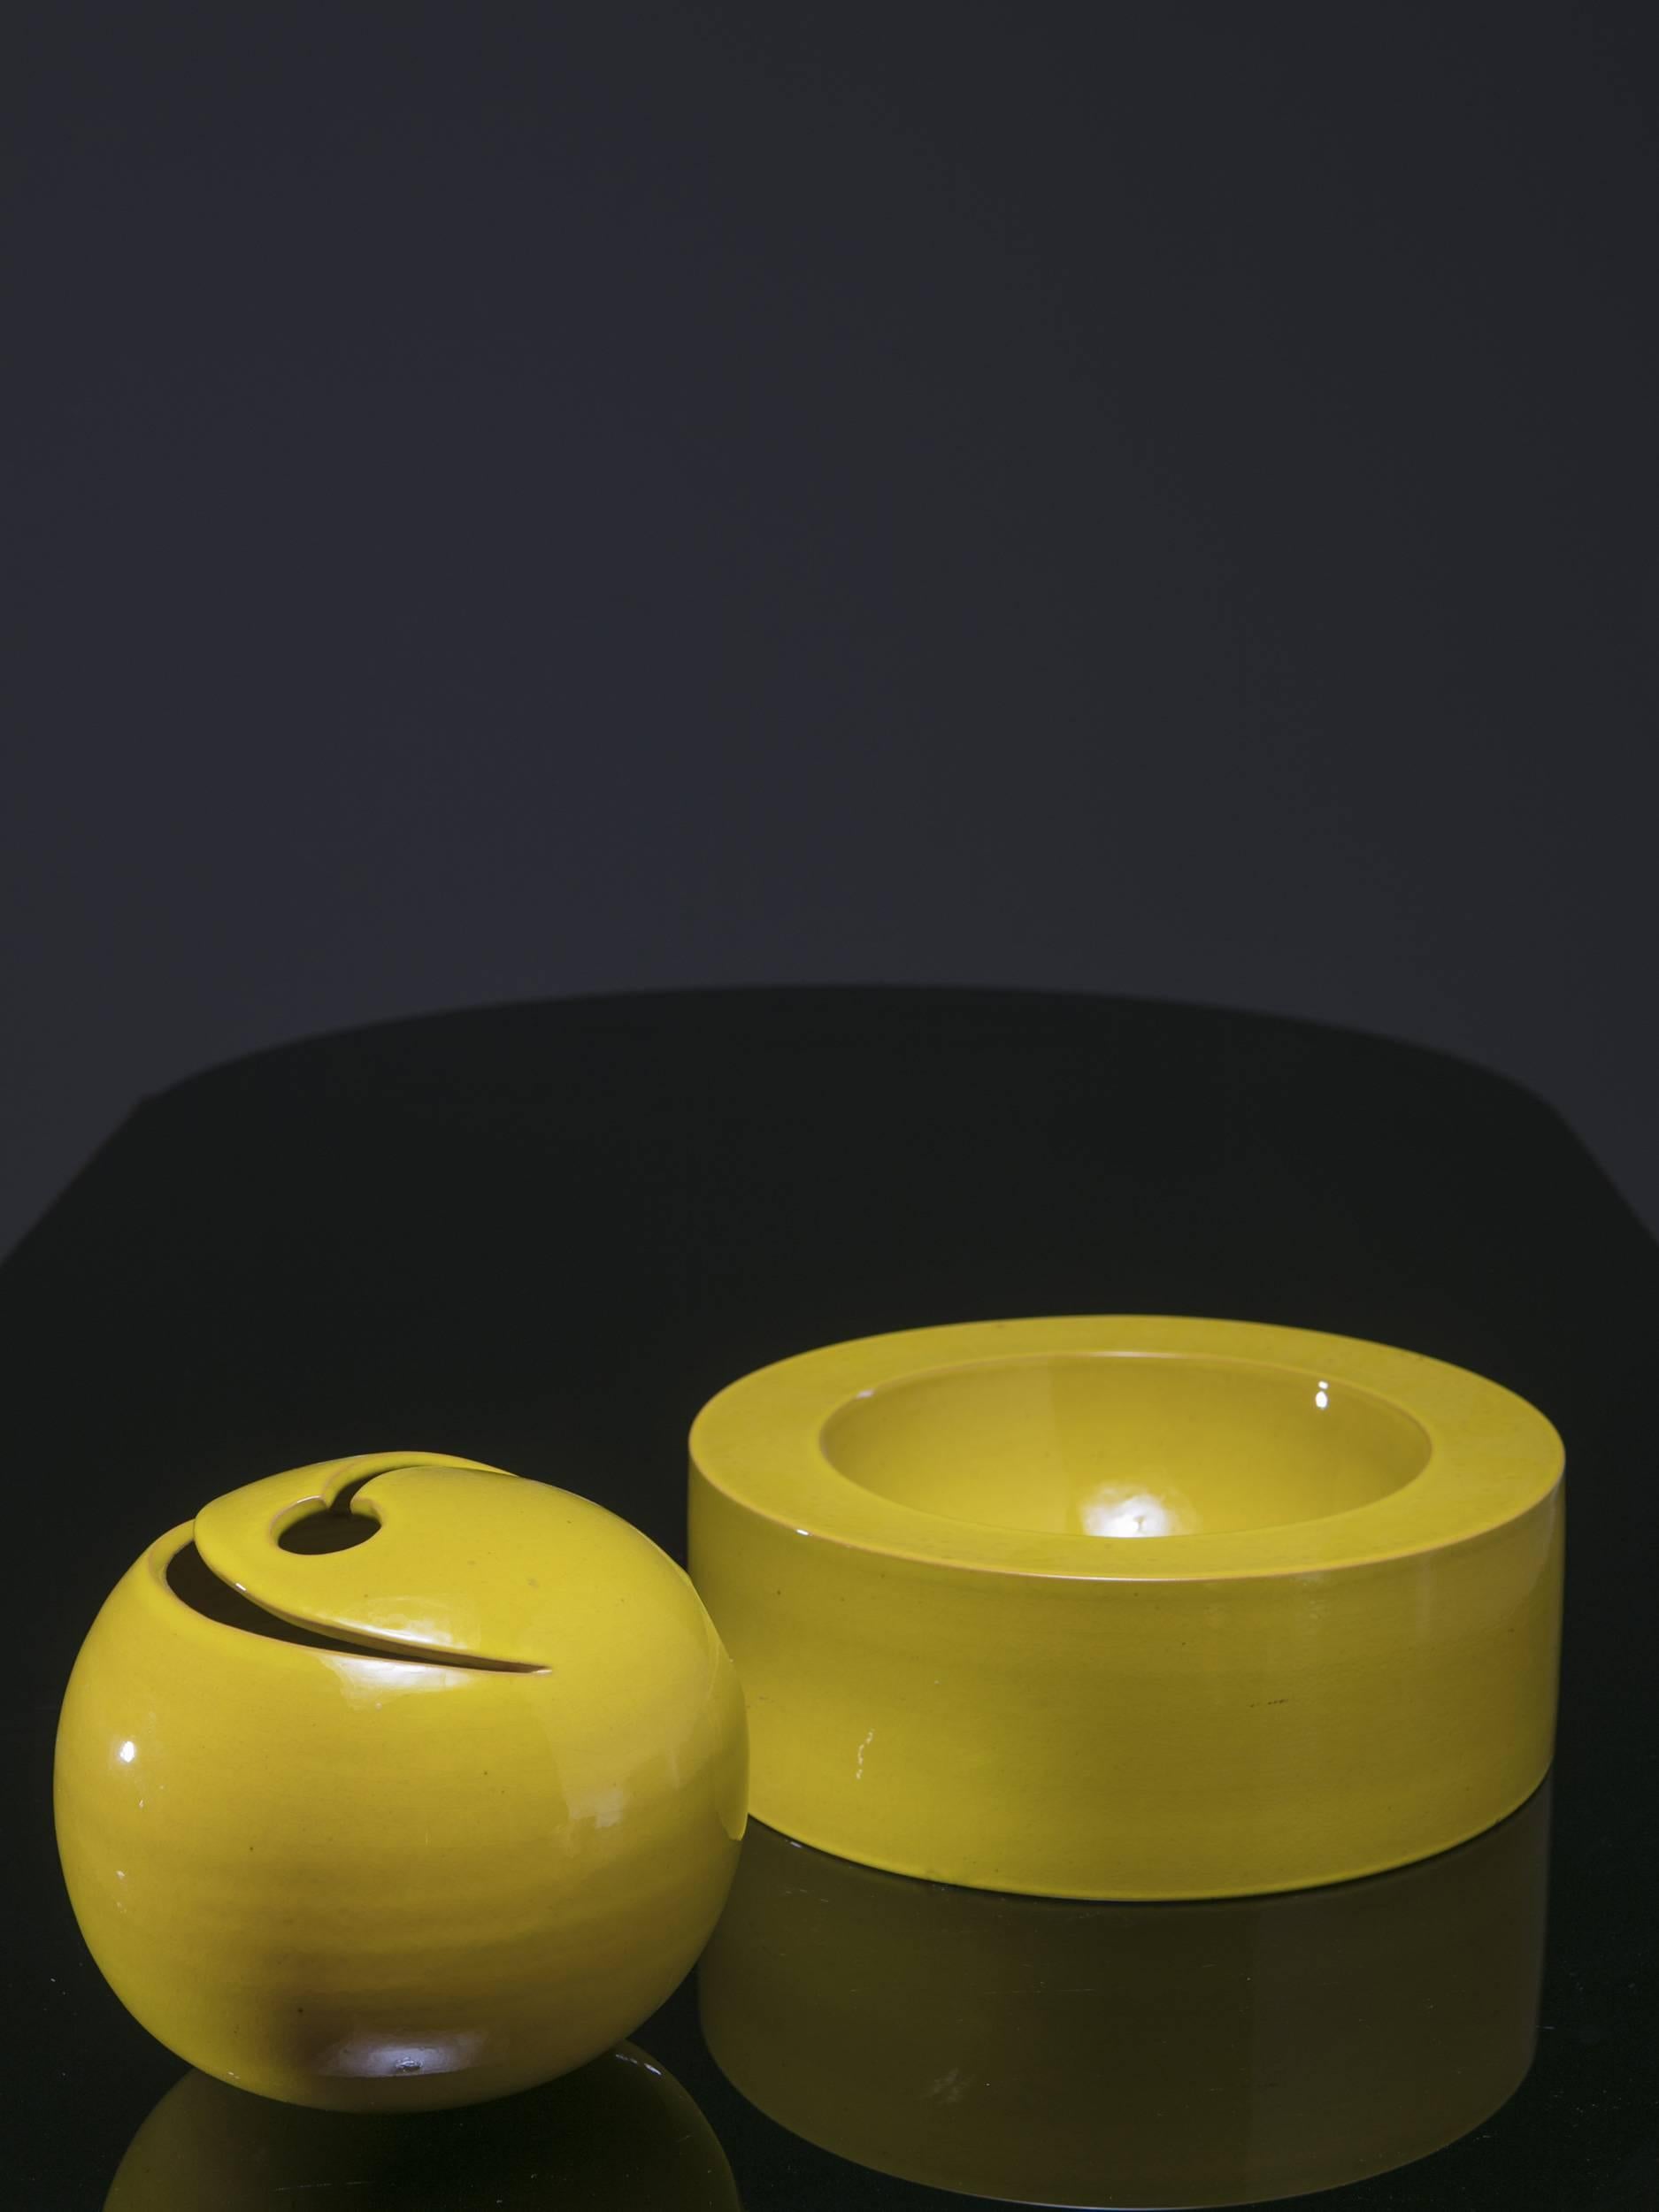 Ceramic sculpture by Franco Bucci.
Two pure shapes can be combined in different positions.